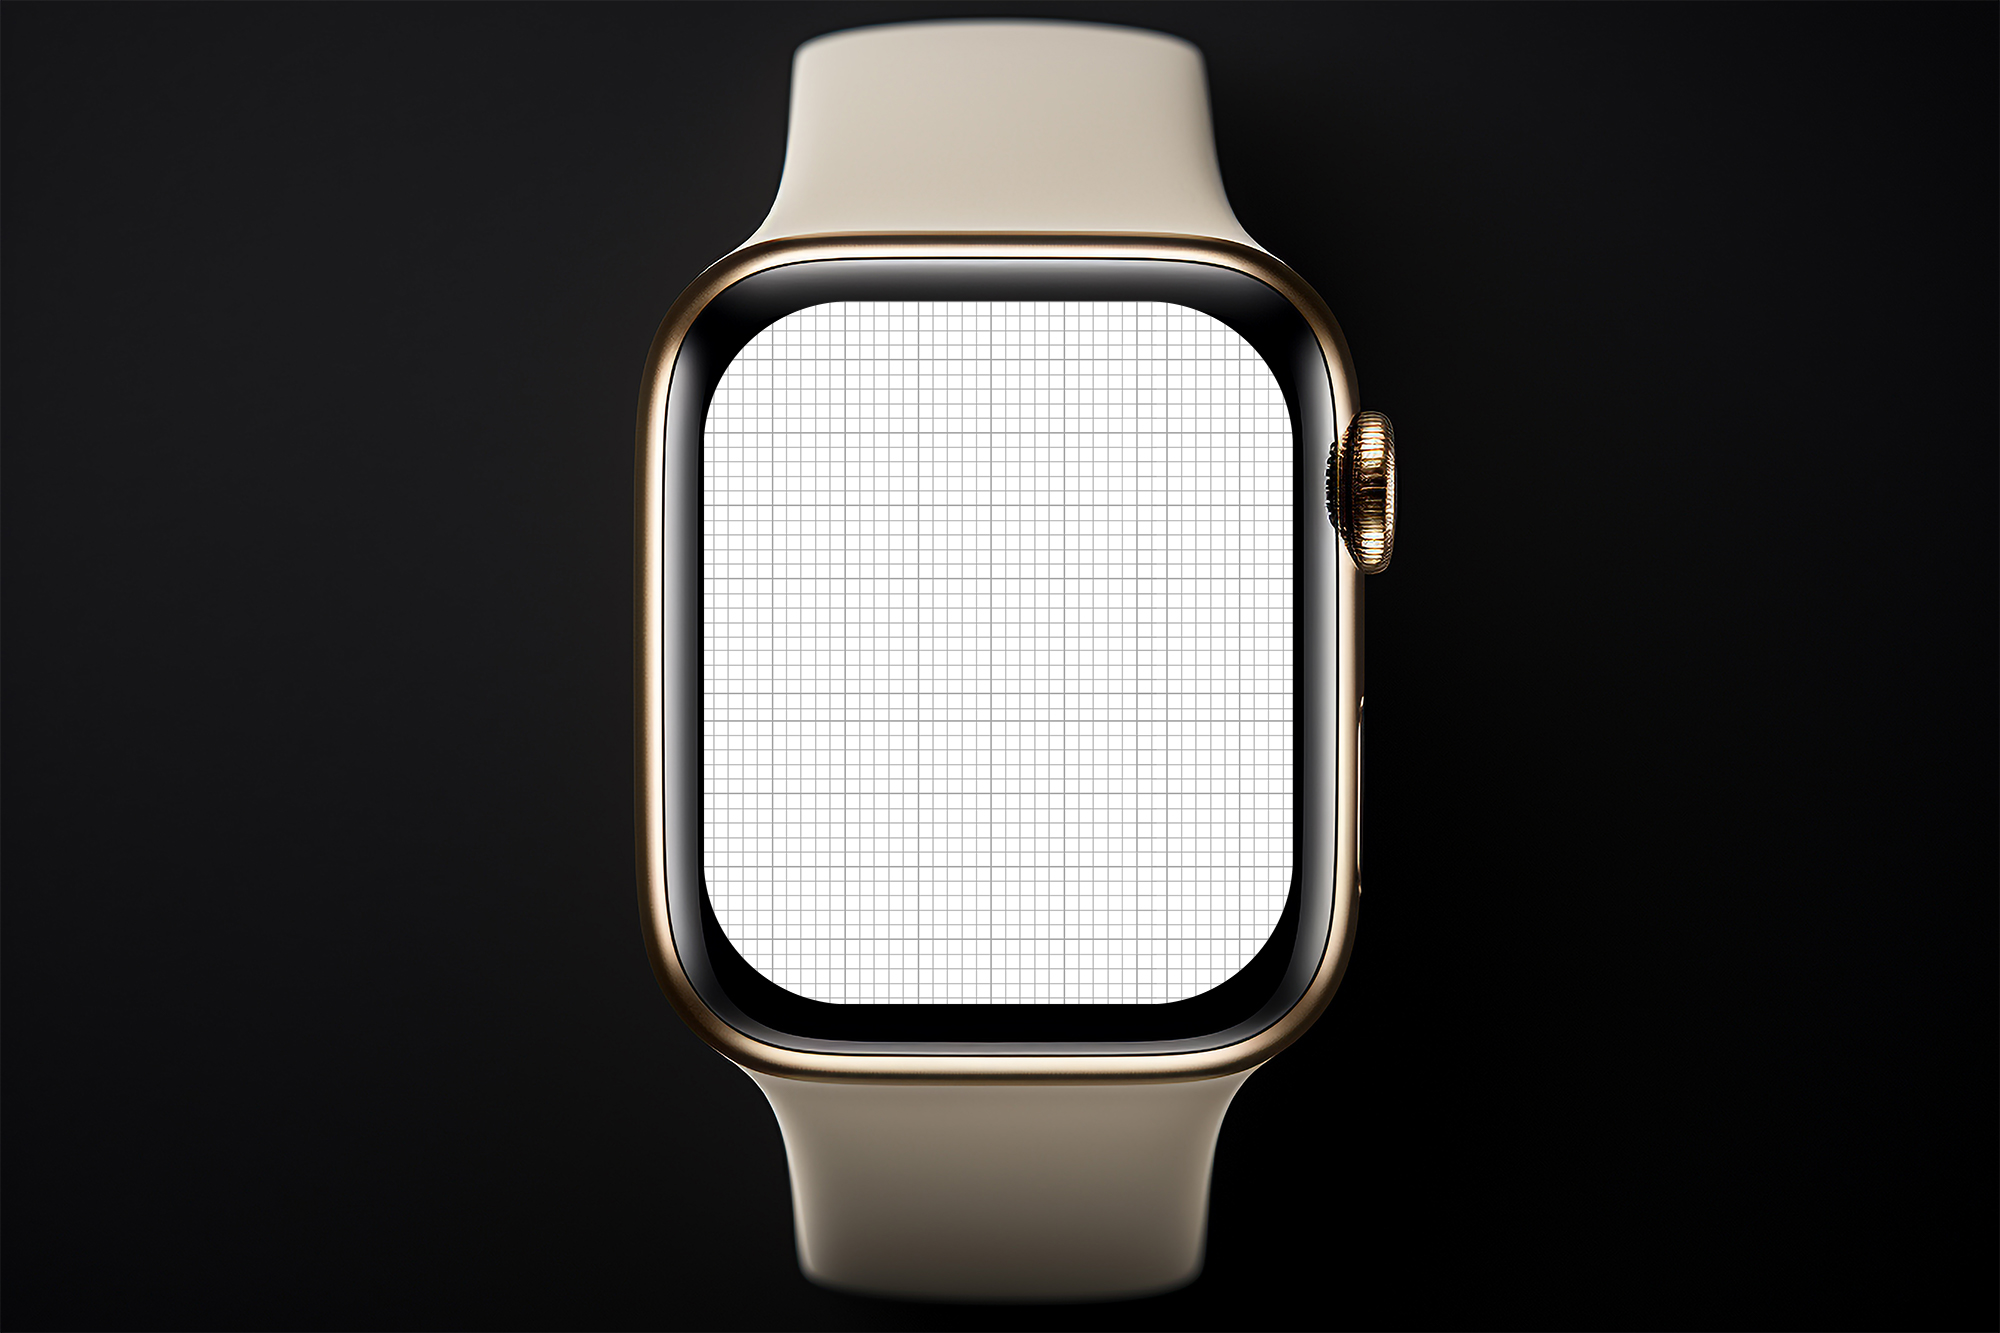 Free Download Close-up smart watch mockup front view grid